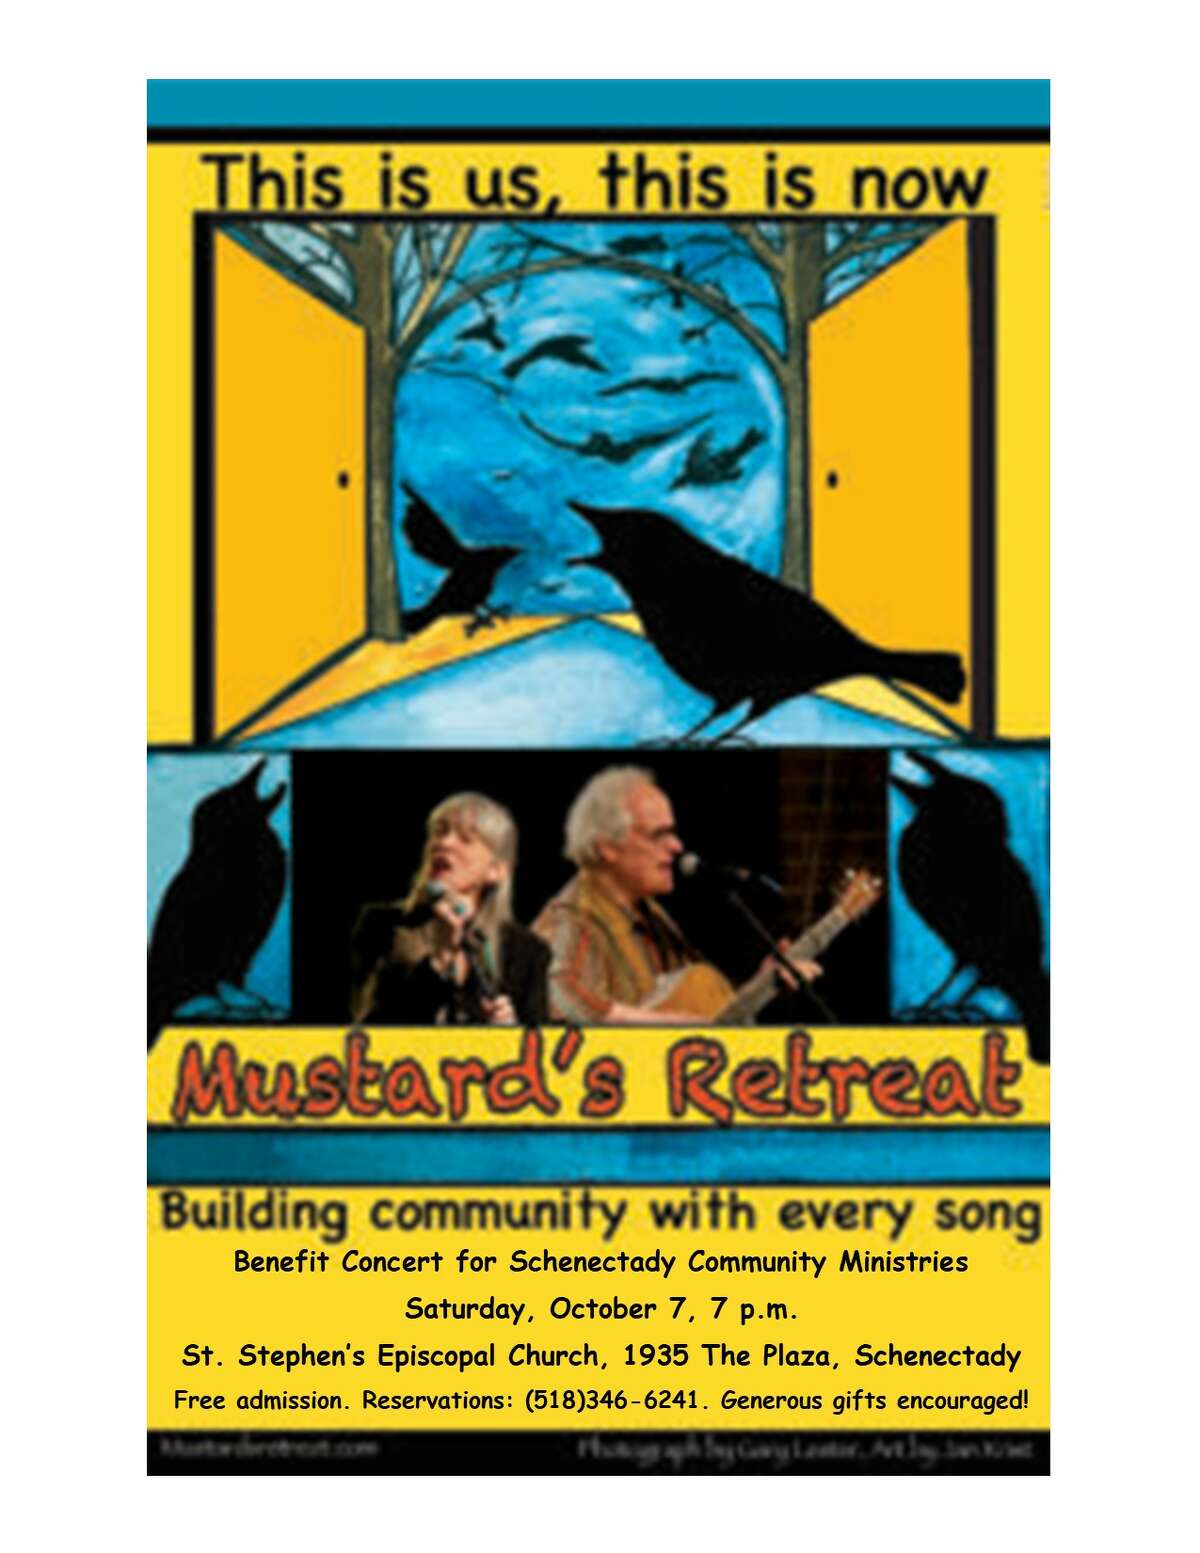 On Saturday, Oct. 7, songwriting/folk duo David Tamulevich and Libby Glover, also known as Mustard's Retreat, will perform a St. Stephen’s Episcopal Church, 1935 The Plaza, Schenectady, to benefit Schenectady Community Ministries.